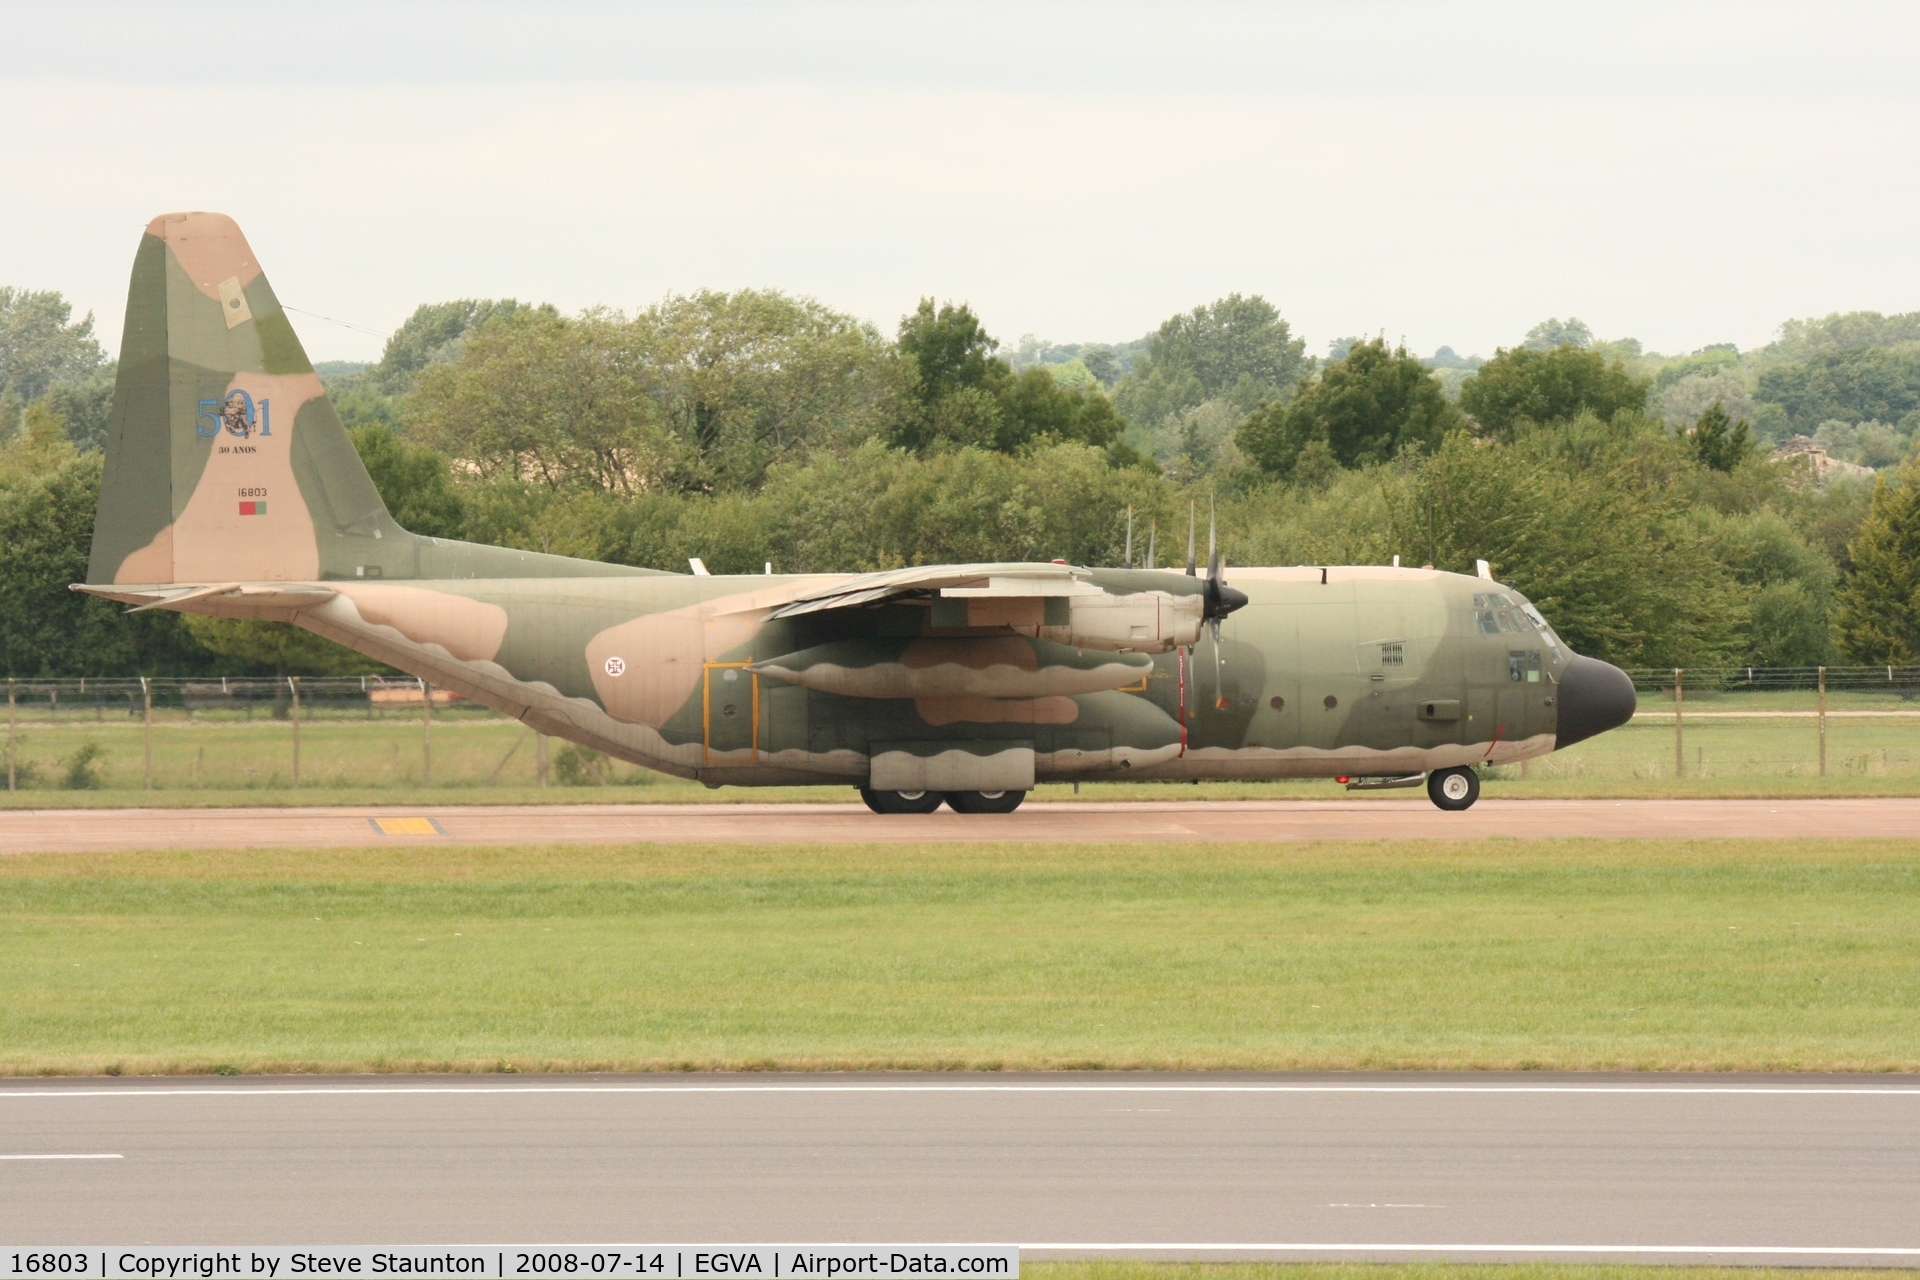 16803, 1978 Lockheed C-130H Hercules C/N 382-4772, Taken at the Royal International Air Tattoo 2008 during arrivals and departures (show days cancelled due to bad weather)